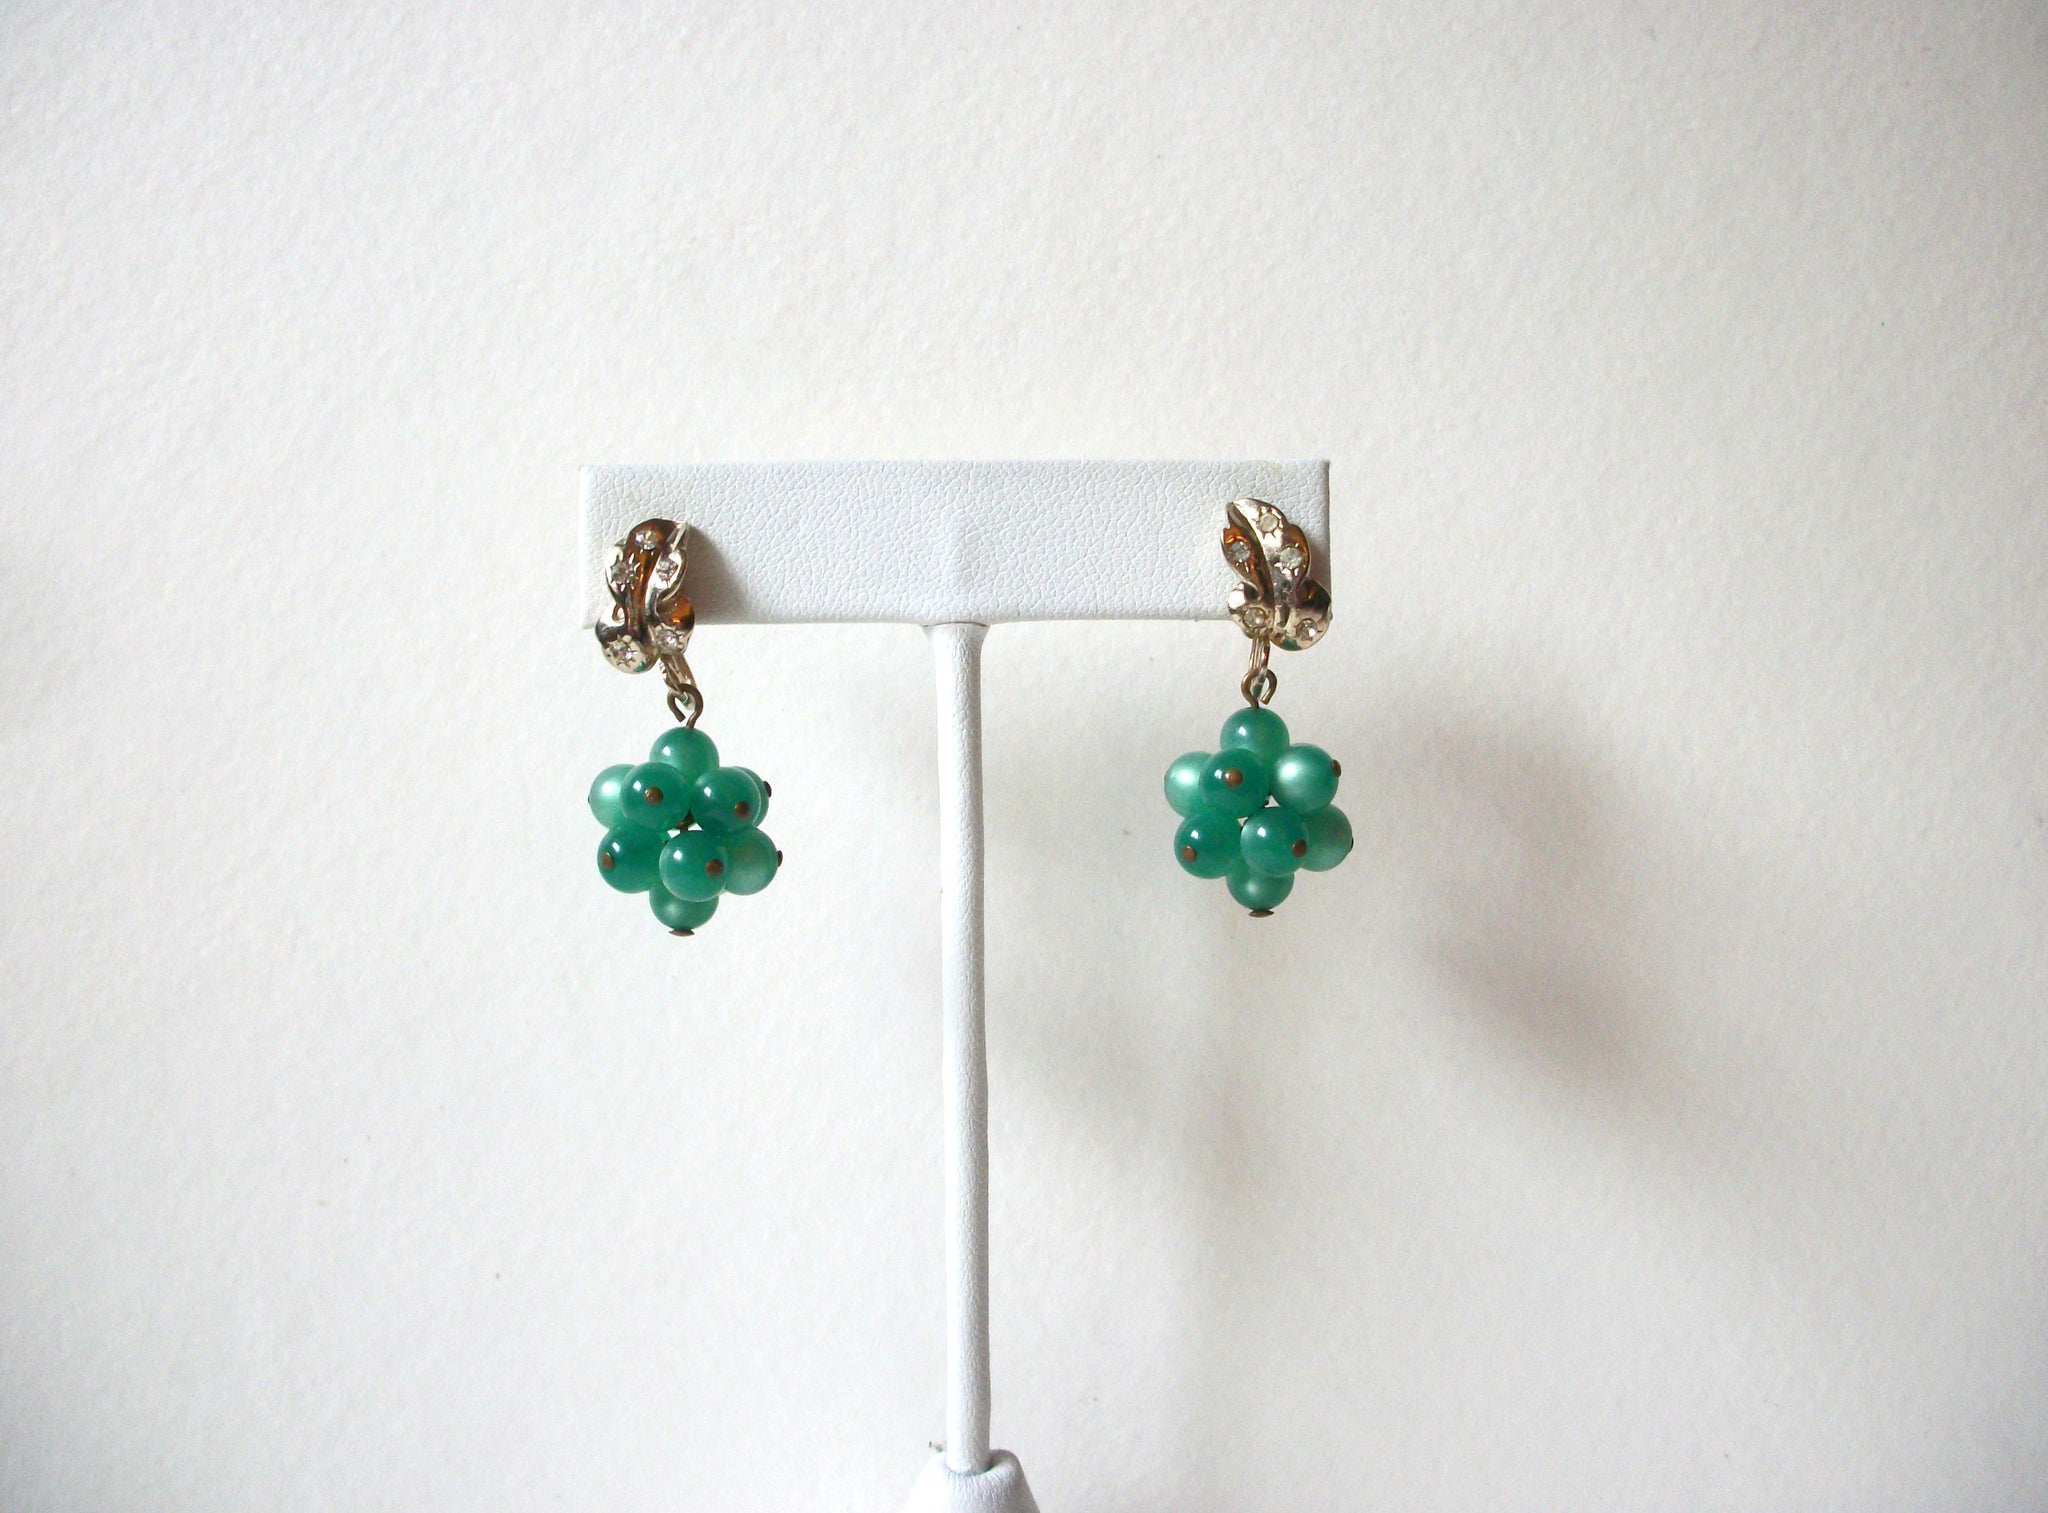 Vintage Turquoise Green Lucite Screw Back Earrings 71820